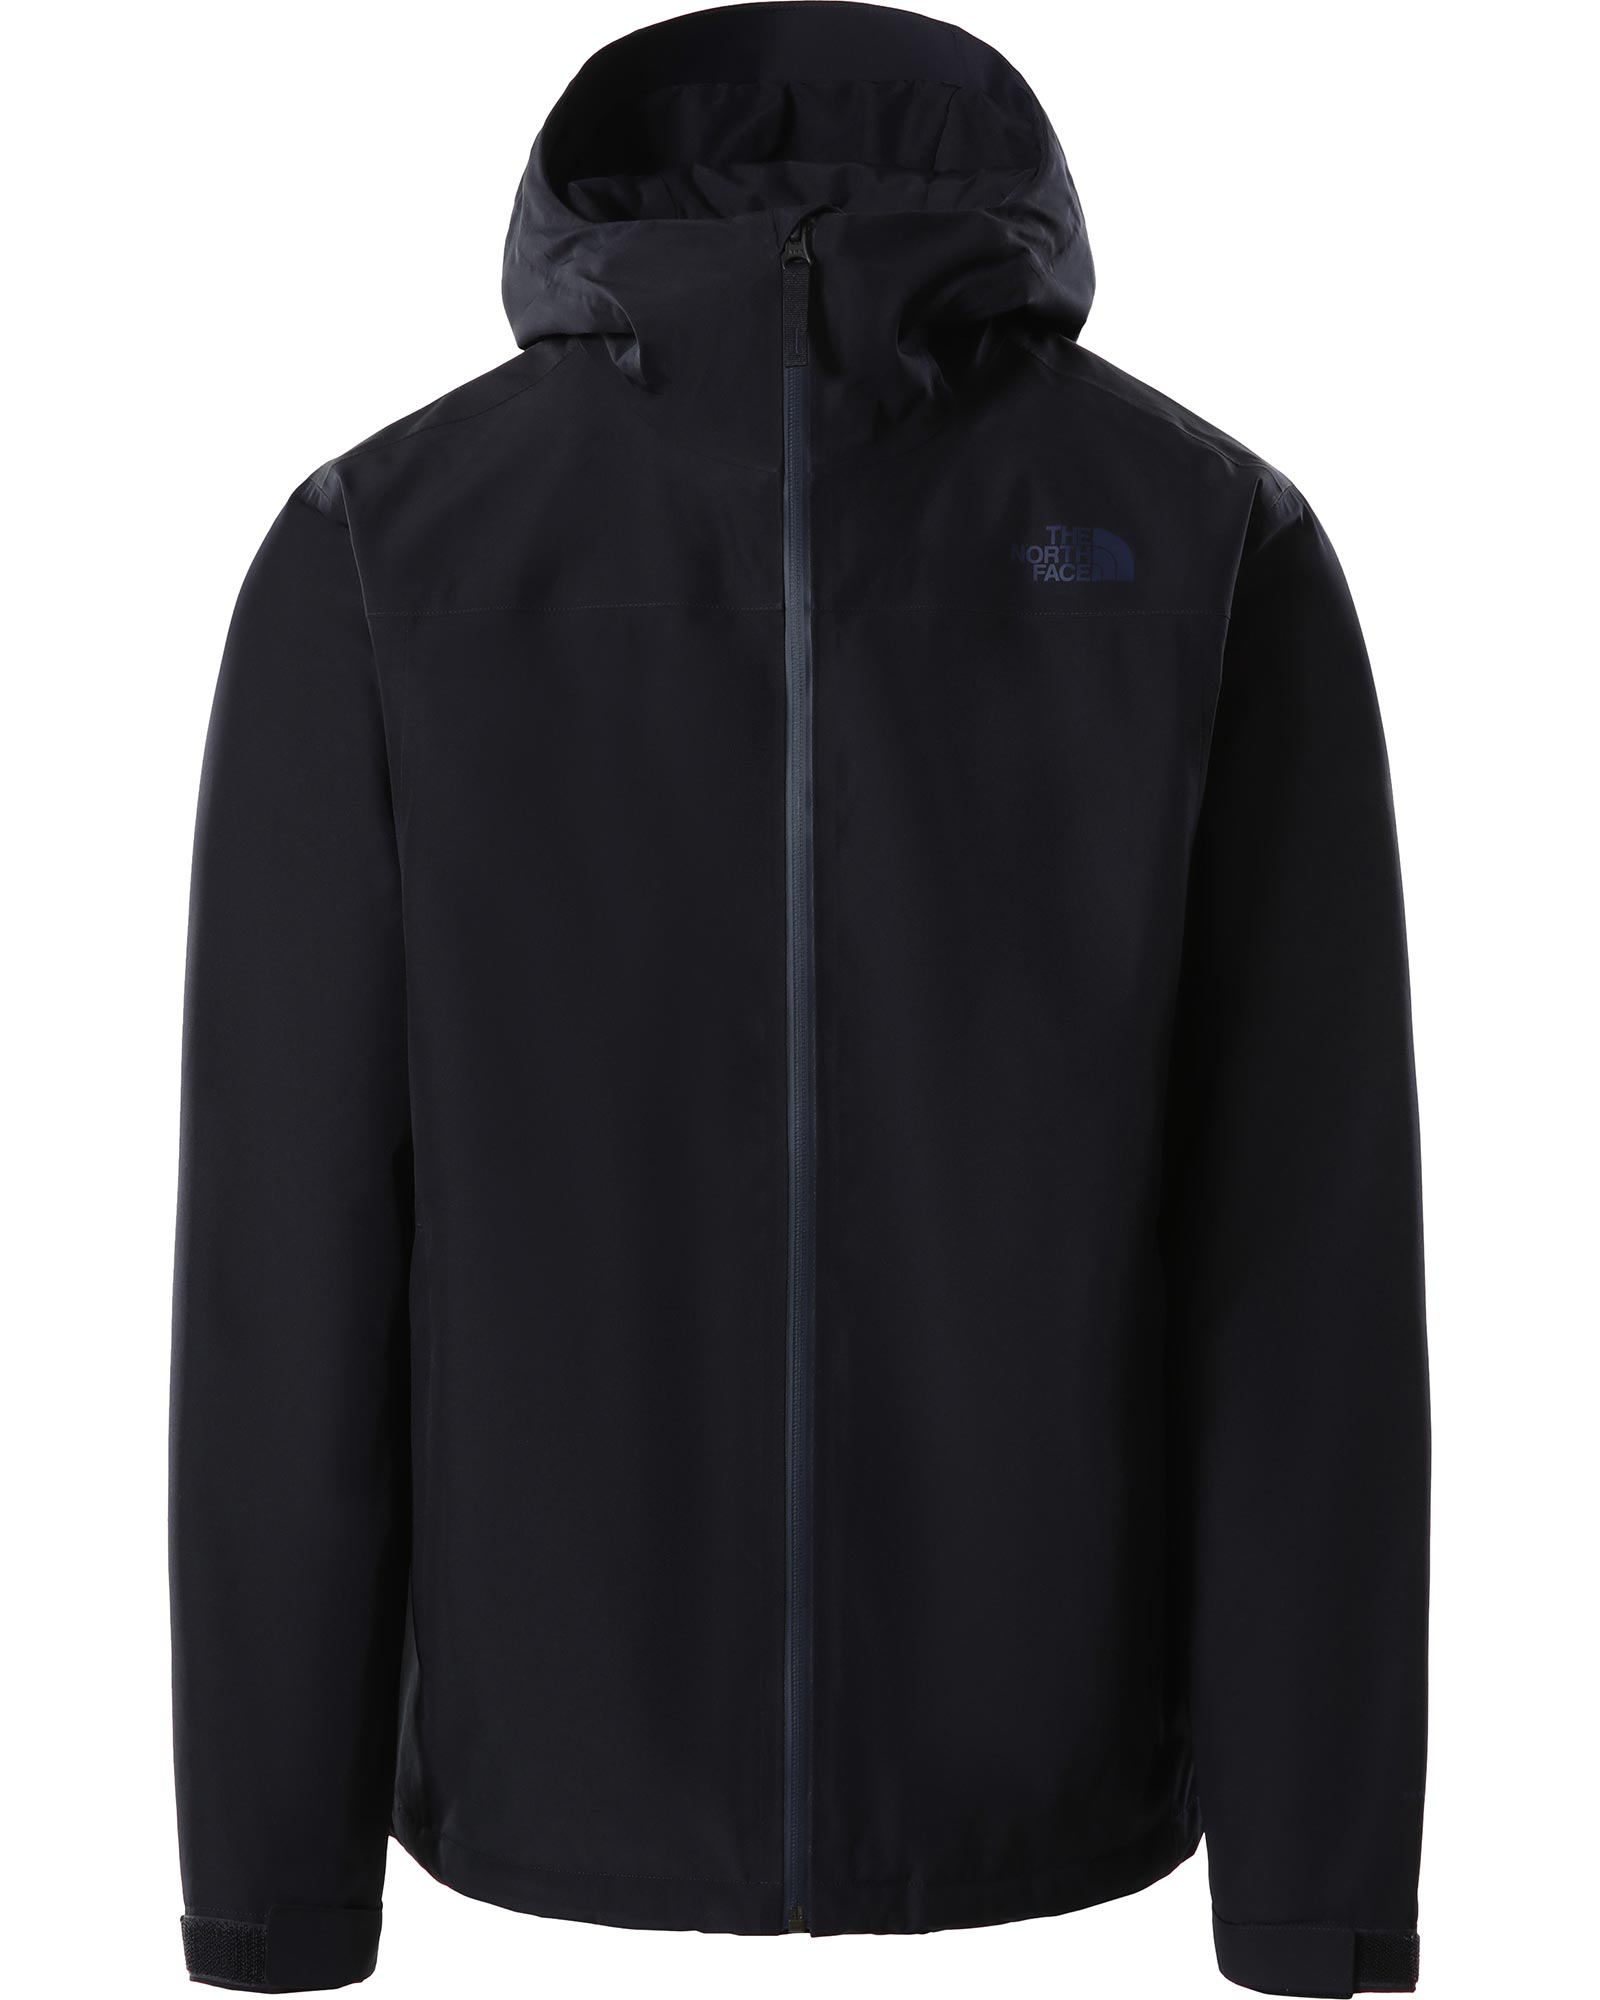 The North Face Men's Dryzzle FUTURELIGHT Insulated Jacket